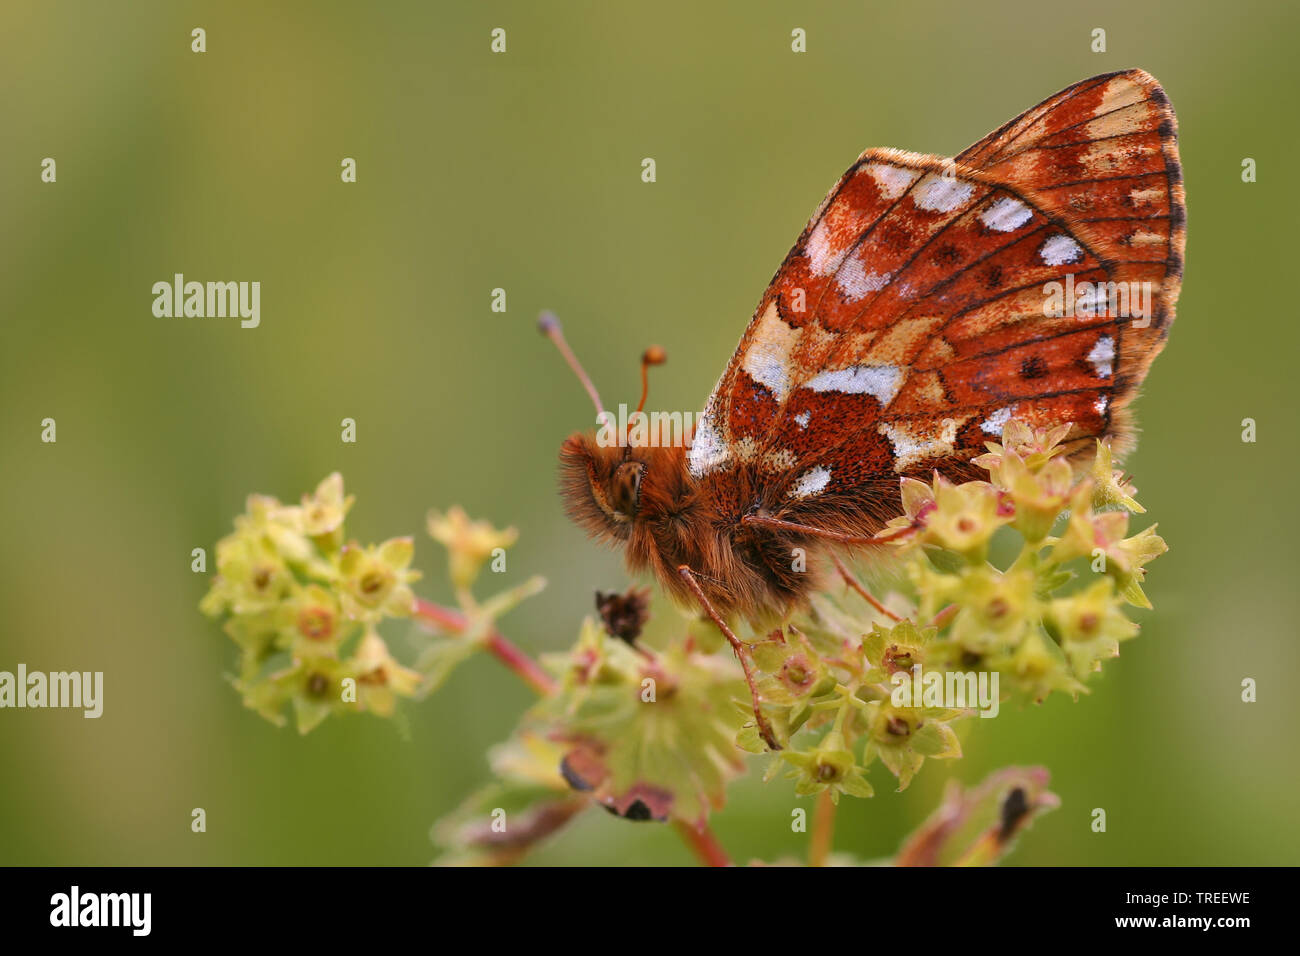 sheherd's fritillary (Boloria pales), on blooming lady's mantle, Alchemilla, Netherlands Stock Photo